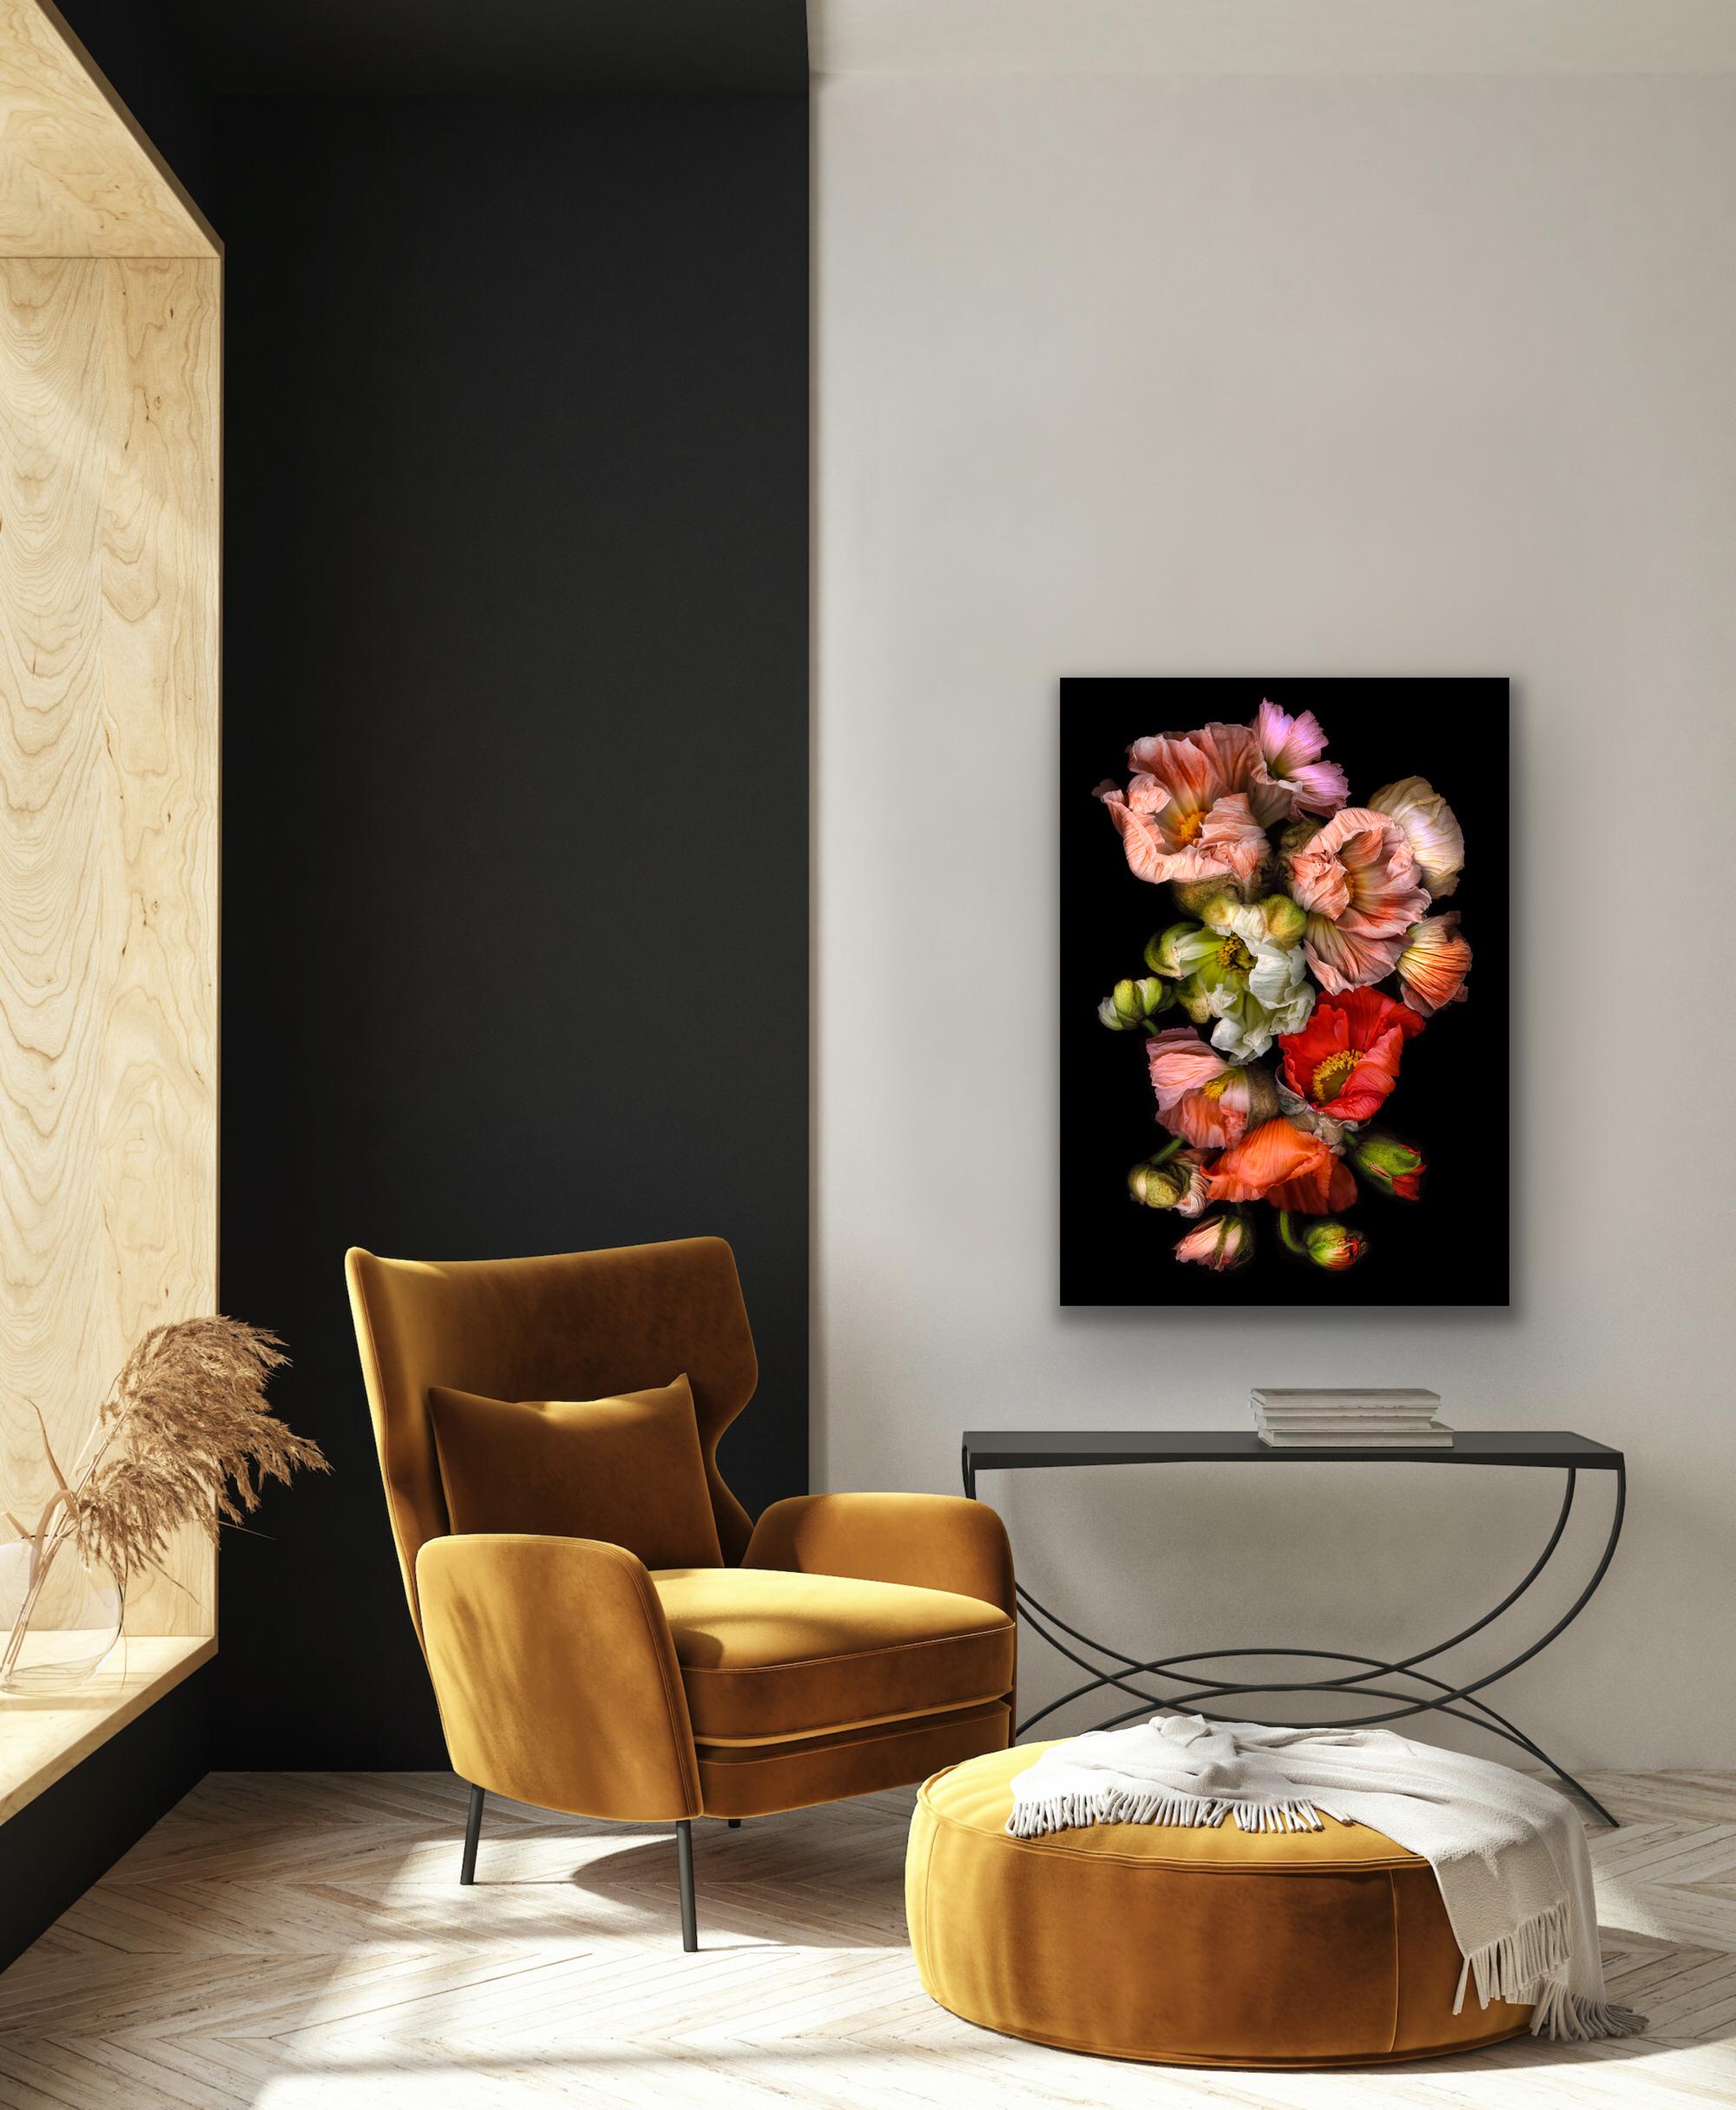 Black Furs is a limited edition print by Allan Forsyth. The black background heightens the tones of the flowers creating a dramatic scene.

Discover new photography by Allan Forsyth online and in our Wychwood Art Gallery in Deddington. Allan Forsyth